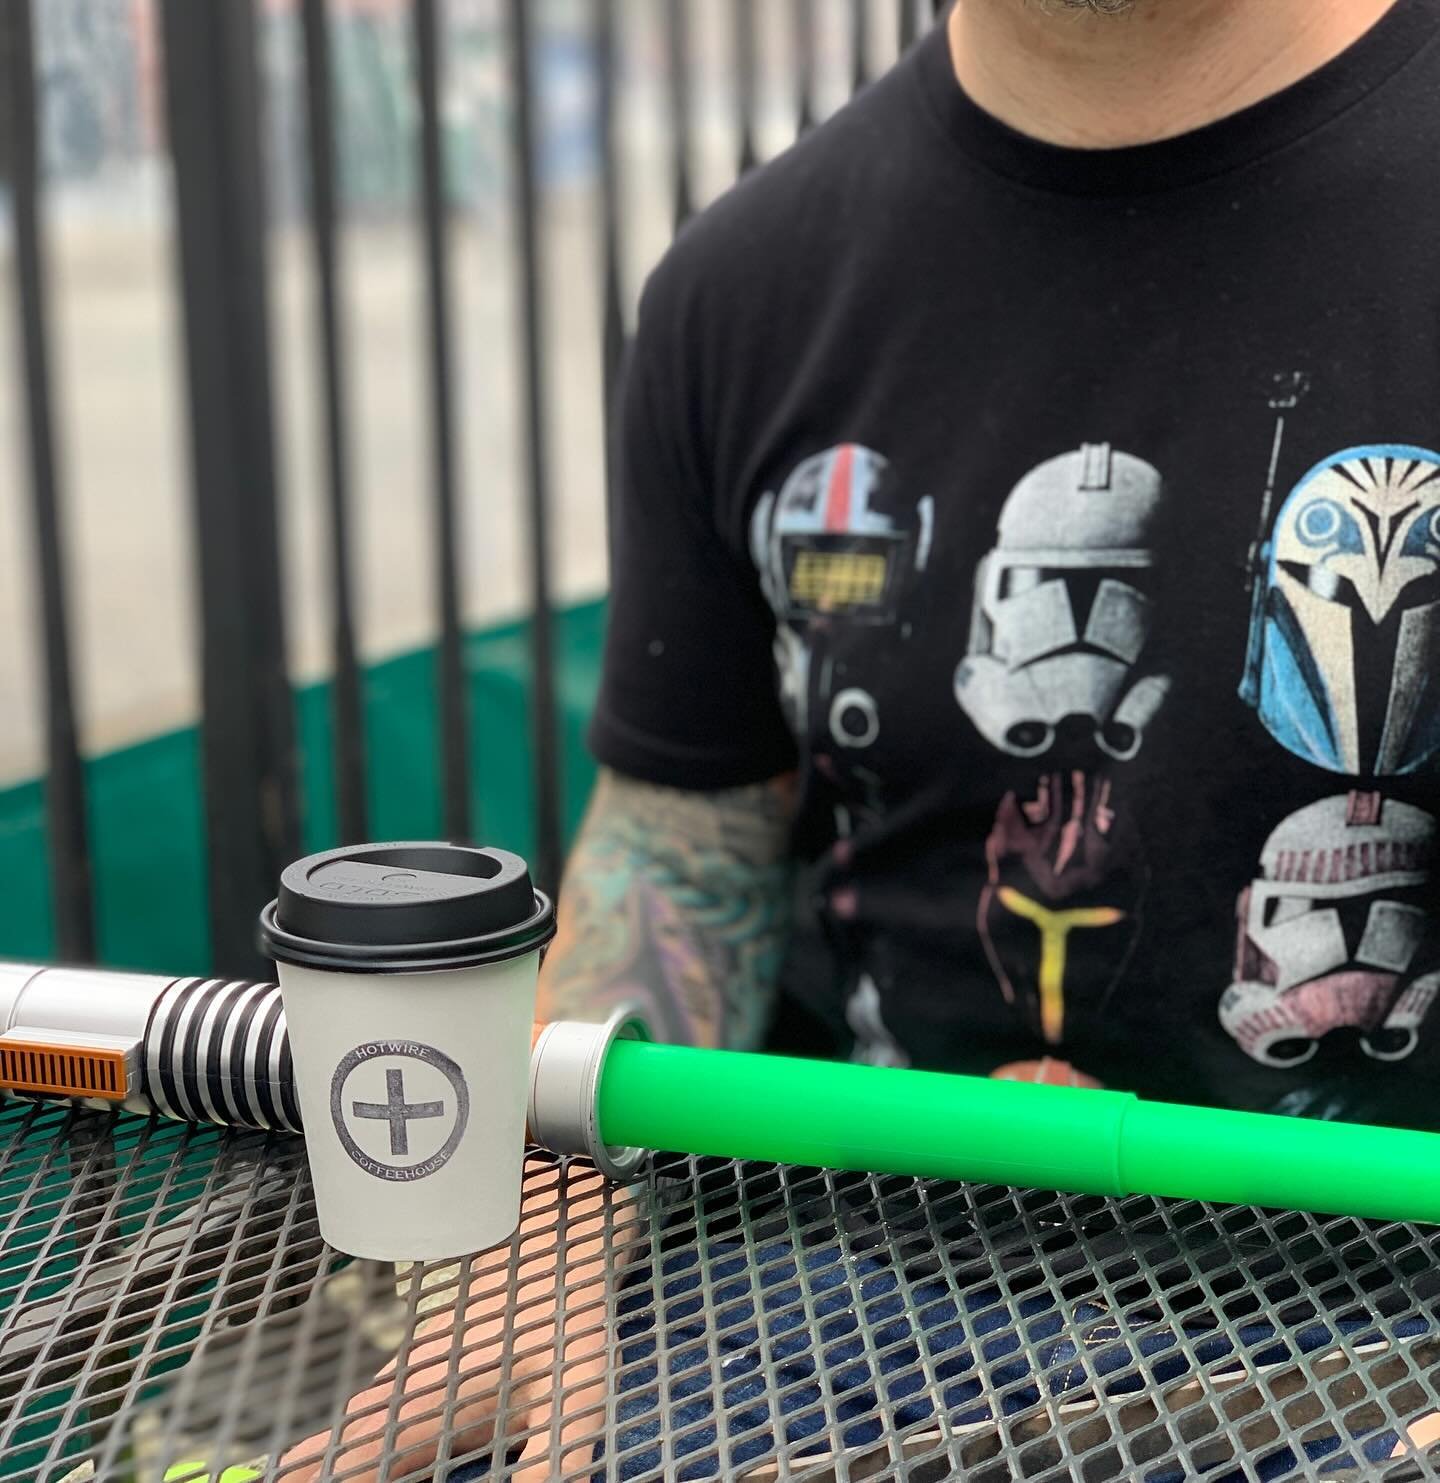 This is the way. Happy May the Fourth! ➕☕️

#hotwire #seattlecoffee #specialsofthemonth #hotwirecoffee #westseattle #coffeeholic #caffeine #igcoffee #icedcoffee #coffeedaily #coffee #coffeetime #coffeelover #coffeeshop #coffeeaddict #food #espresso #